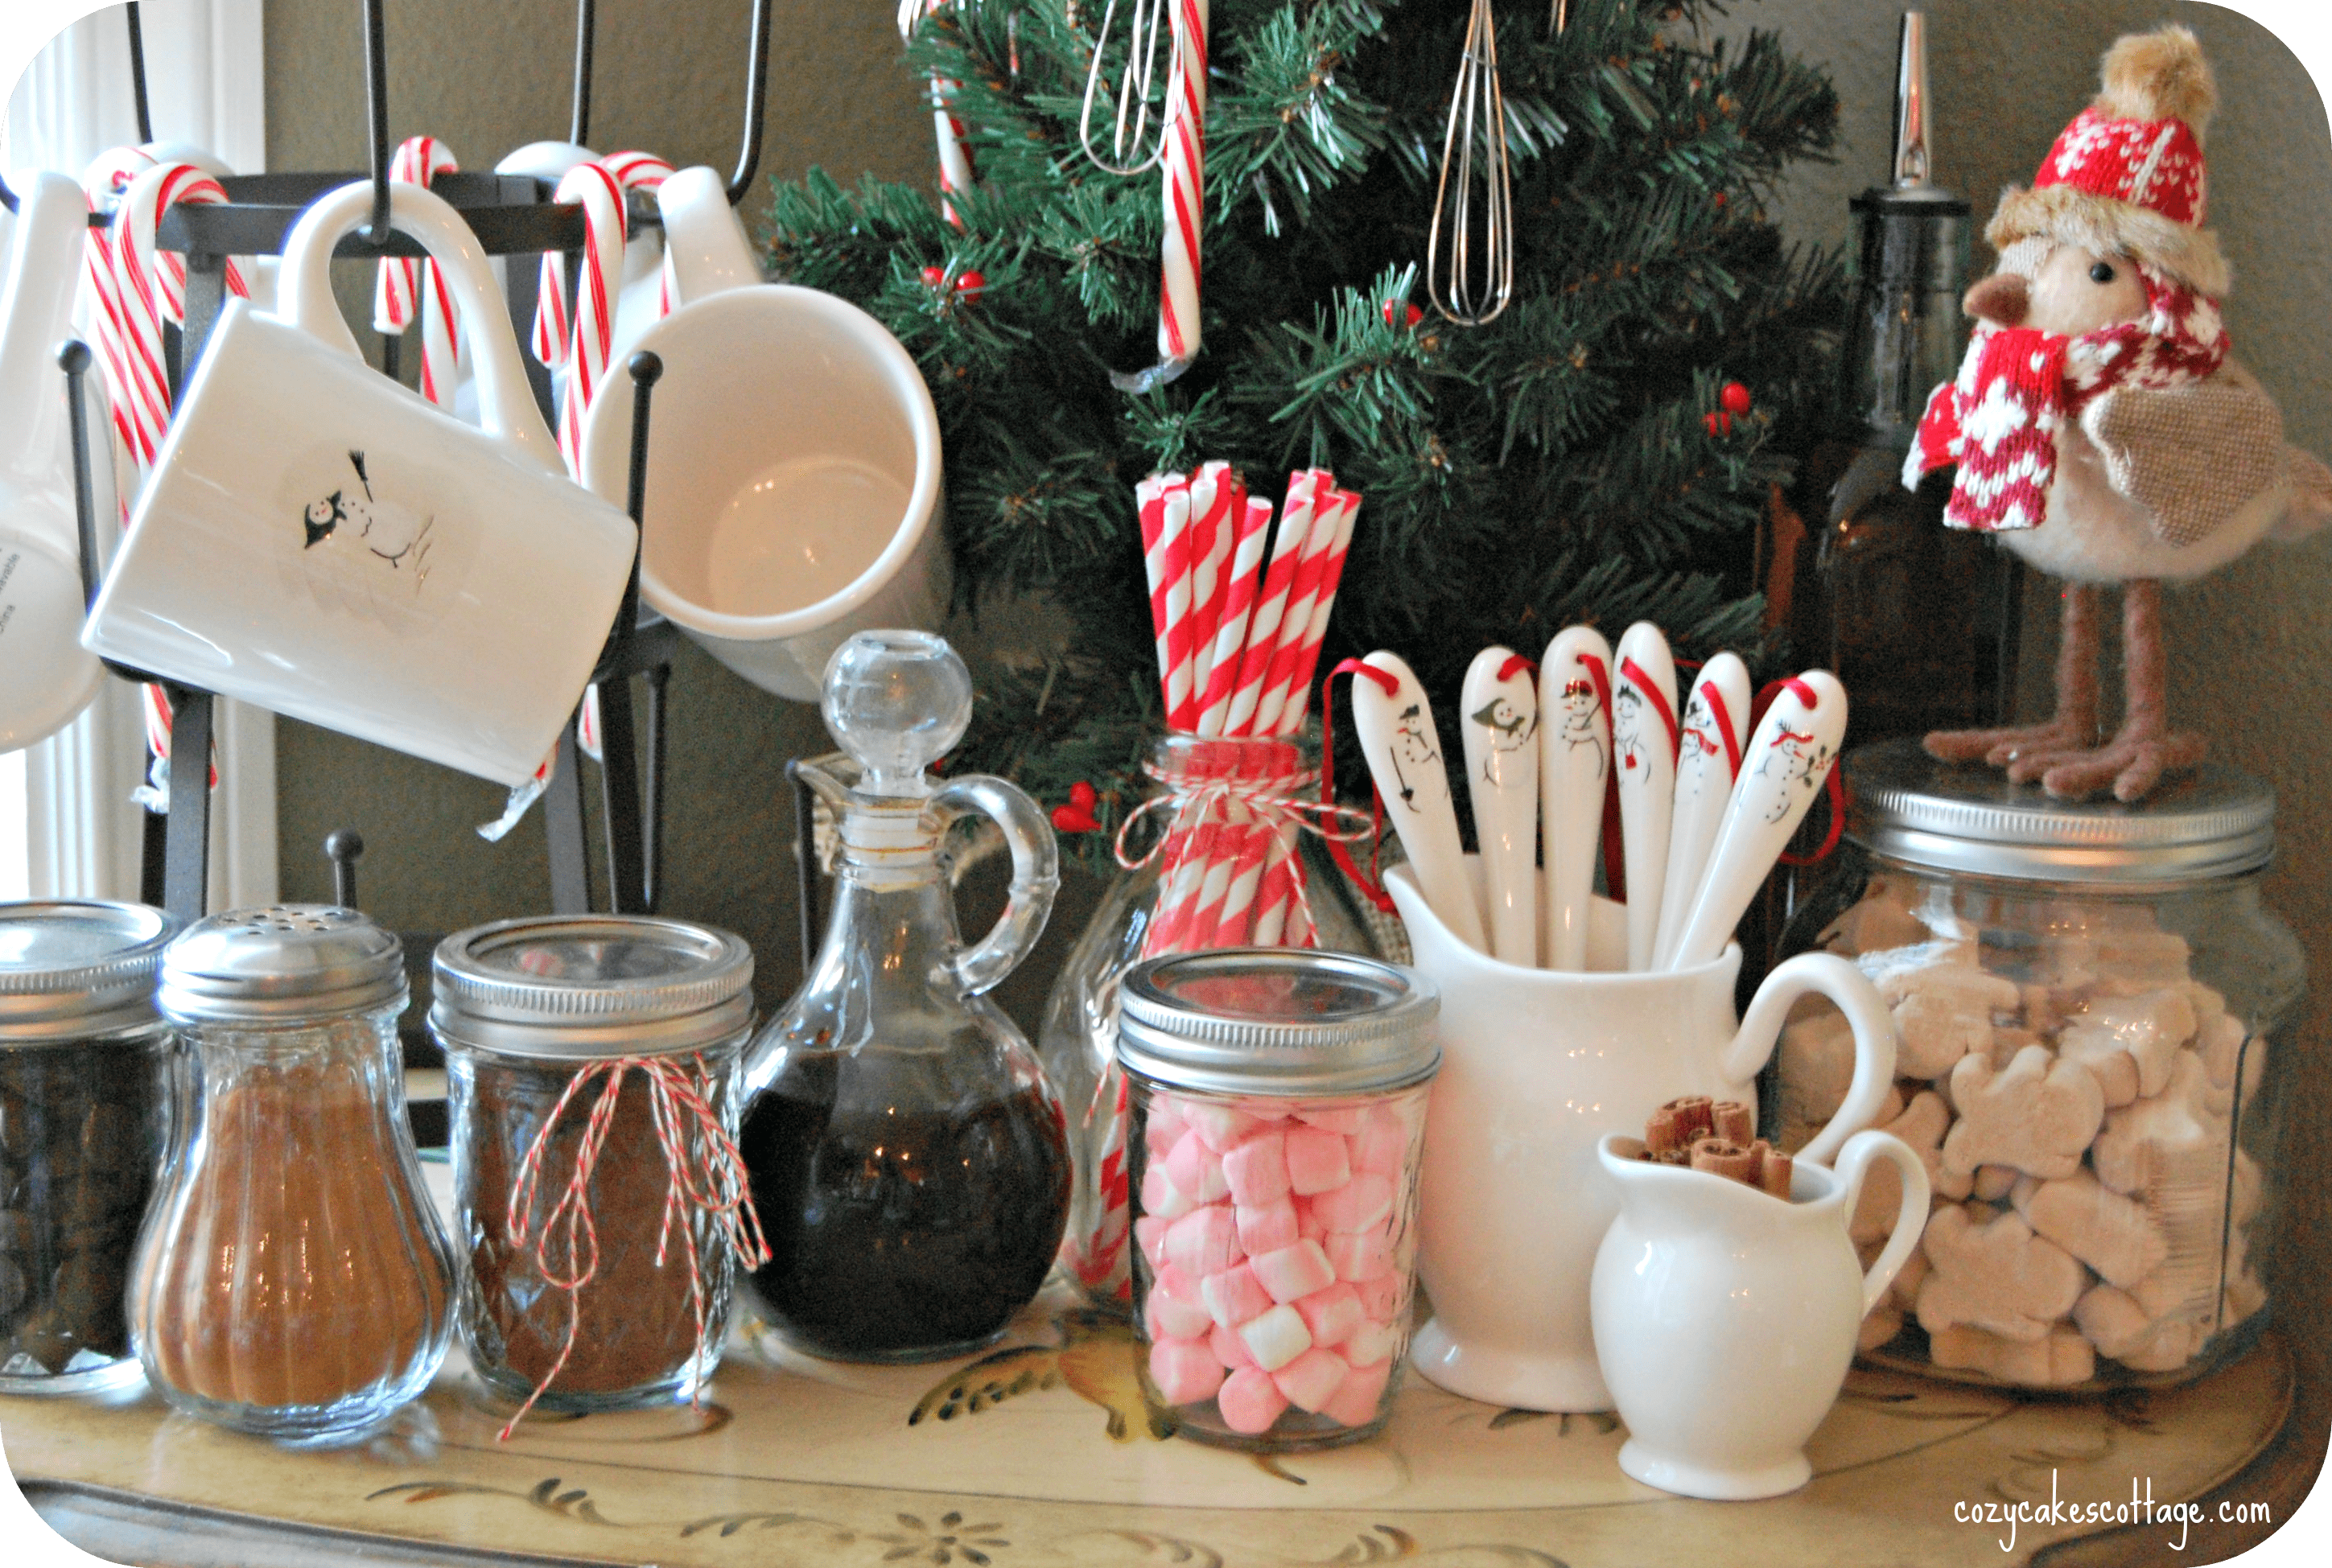 Hot Cocoa Bar from Cozy Cakes Cottage